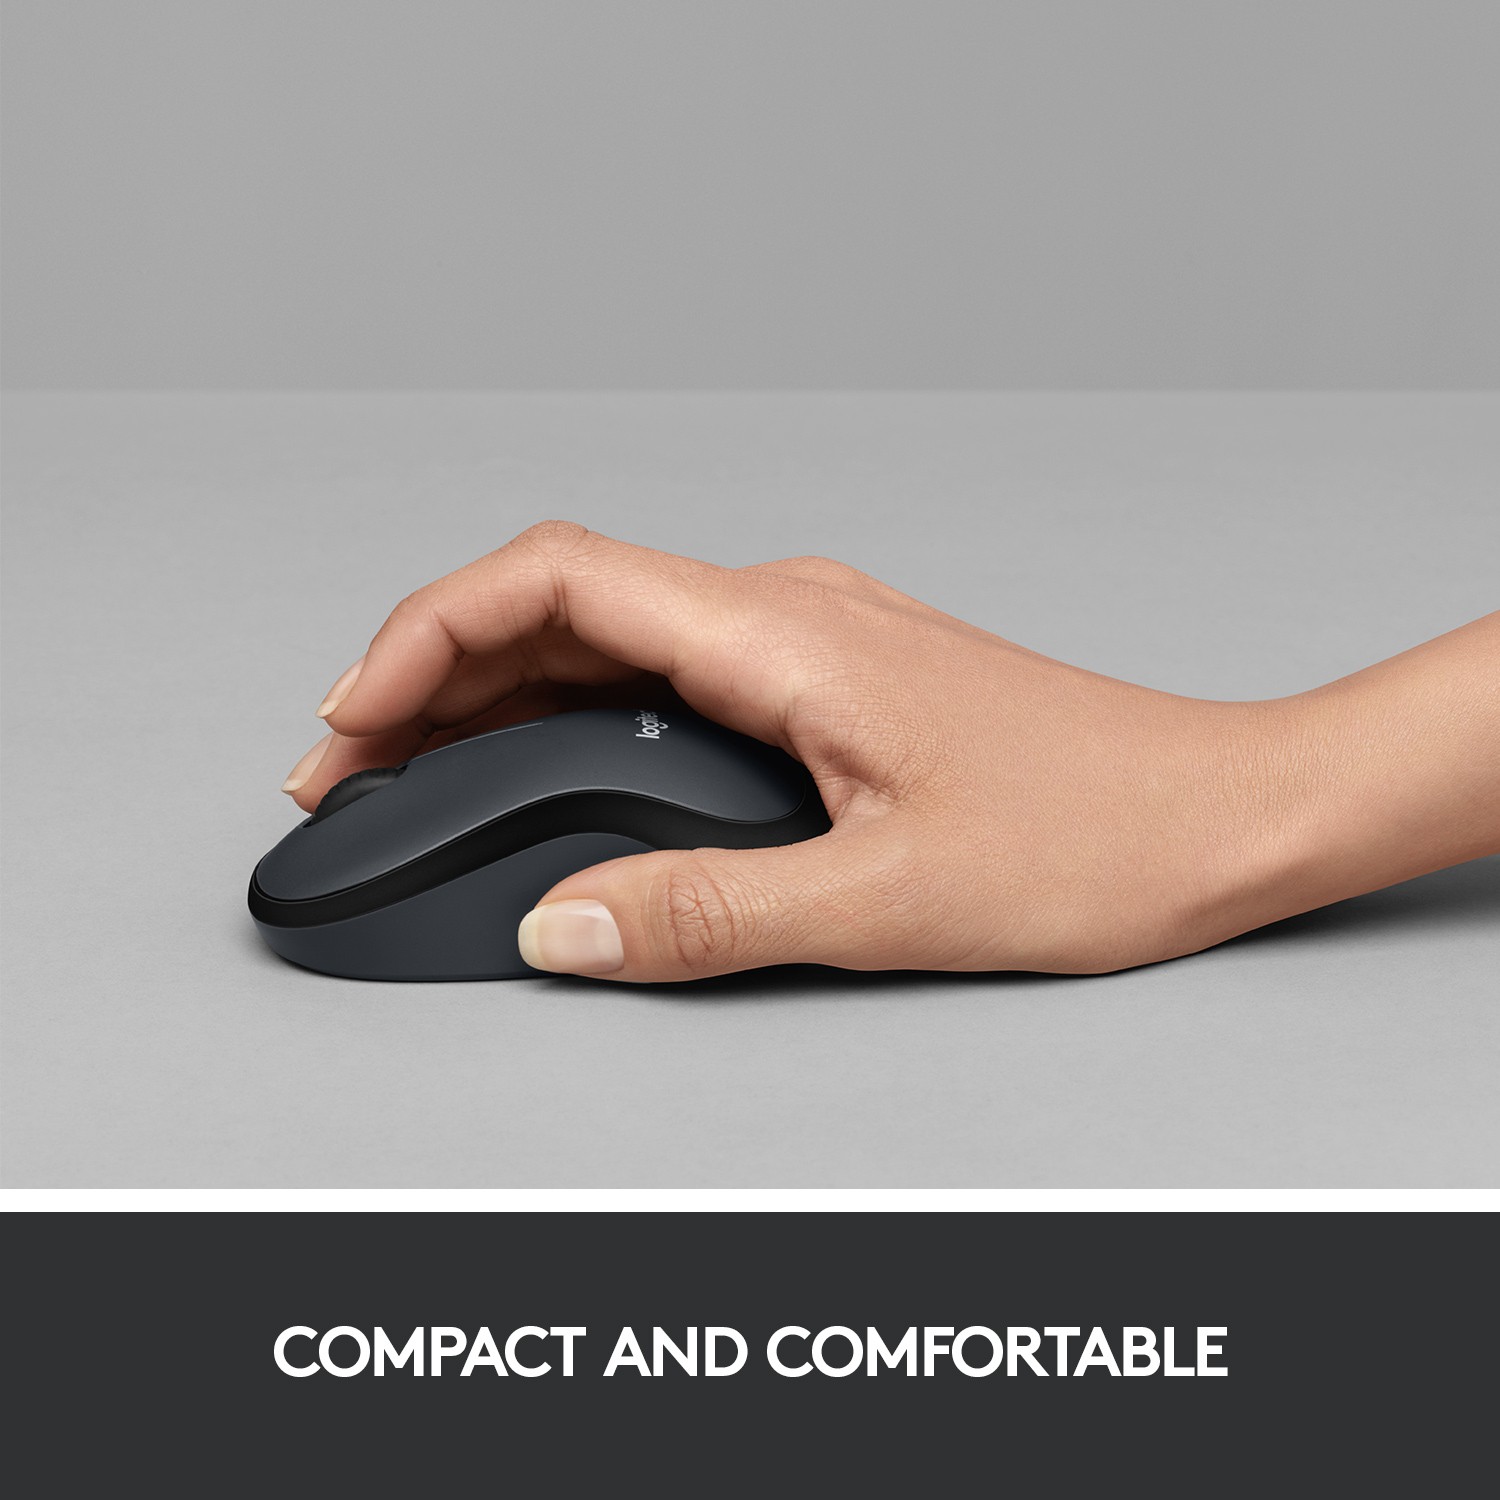 Logitech Silent WRLS Mouse, 2.4 GHz with USB Receiver, Optical Tracking, Ambidextrous, Rose - image 3 of 8